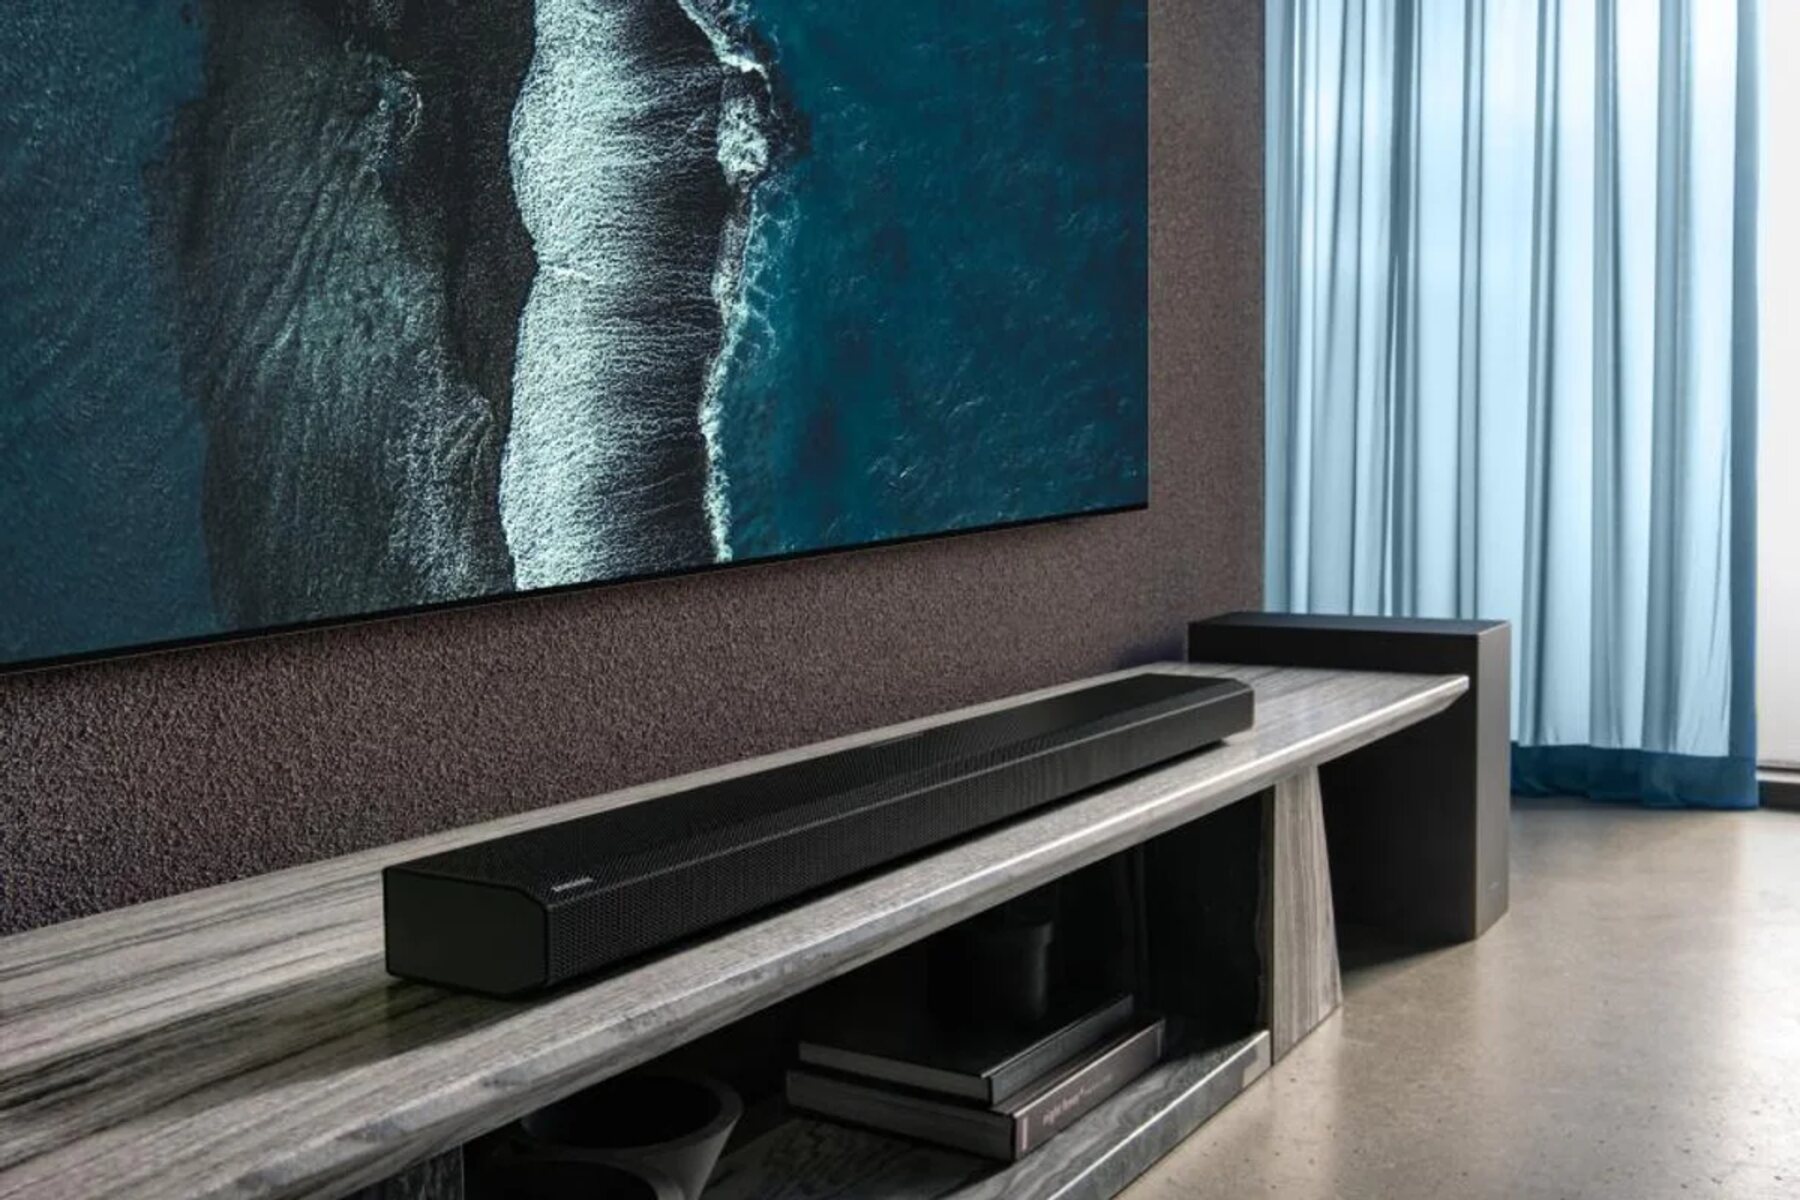 How To Connect Samsung UN46EH5300FXZA To Surround Sound System